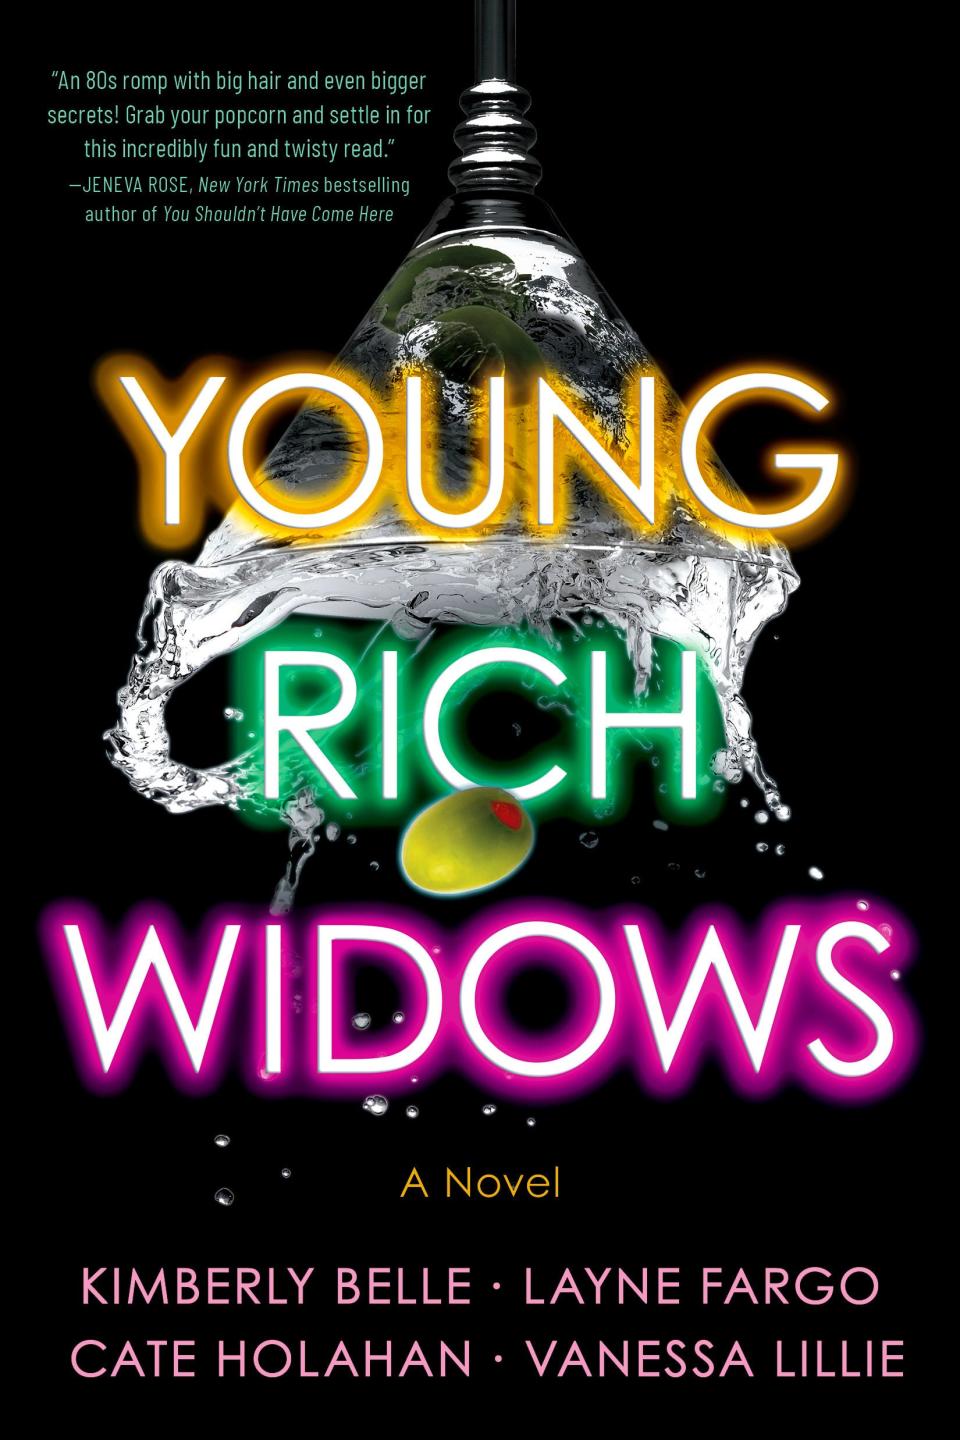 "Young Rich Widows" is being released in print on April 2 after a successful year as an Audible Originals audiobook.